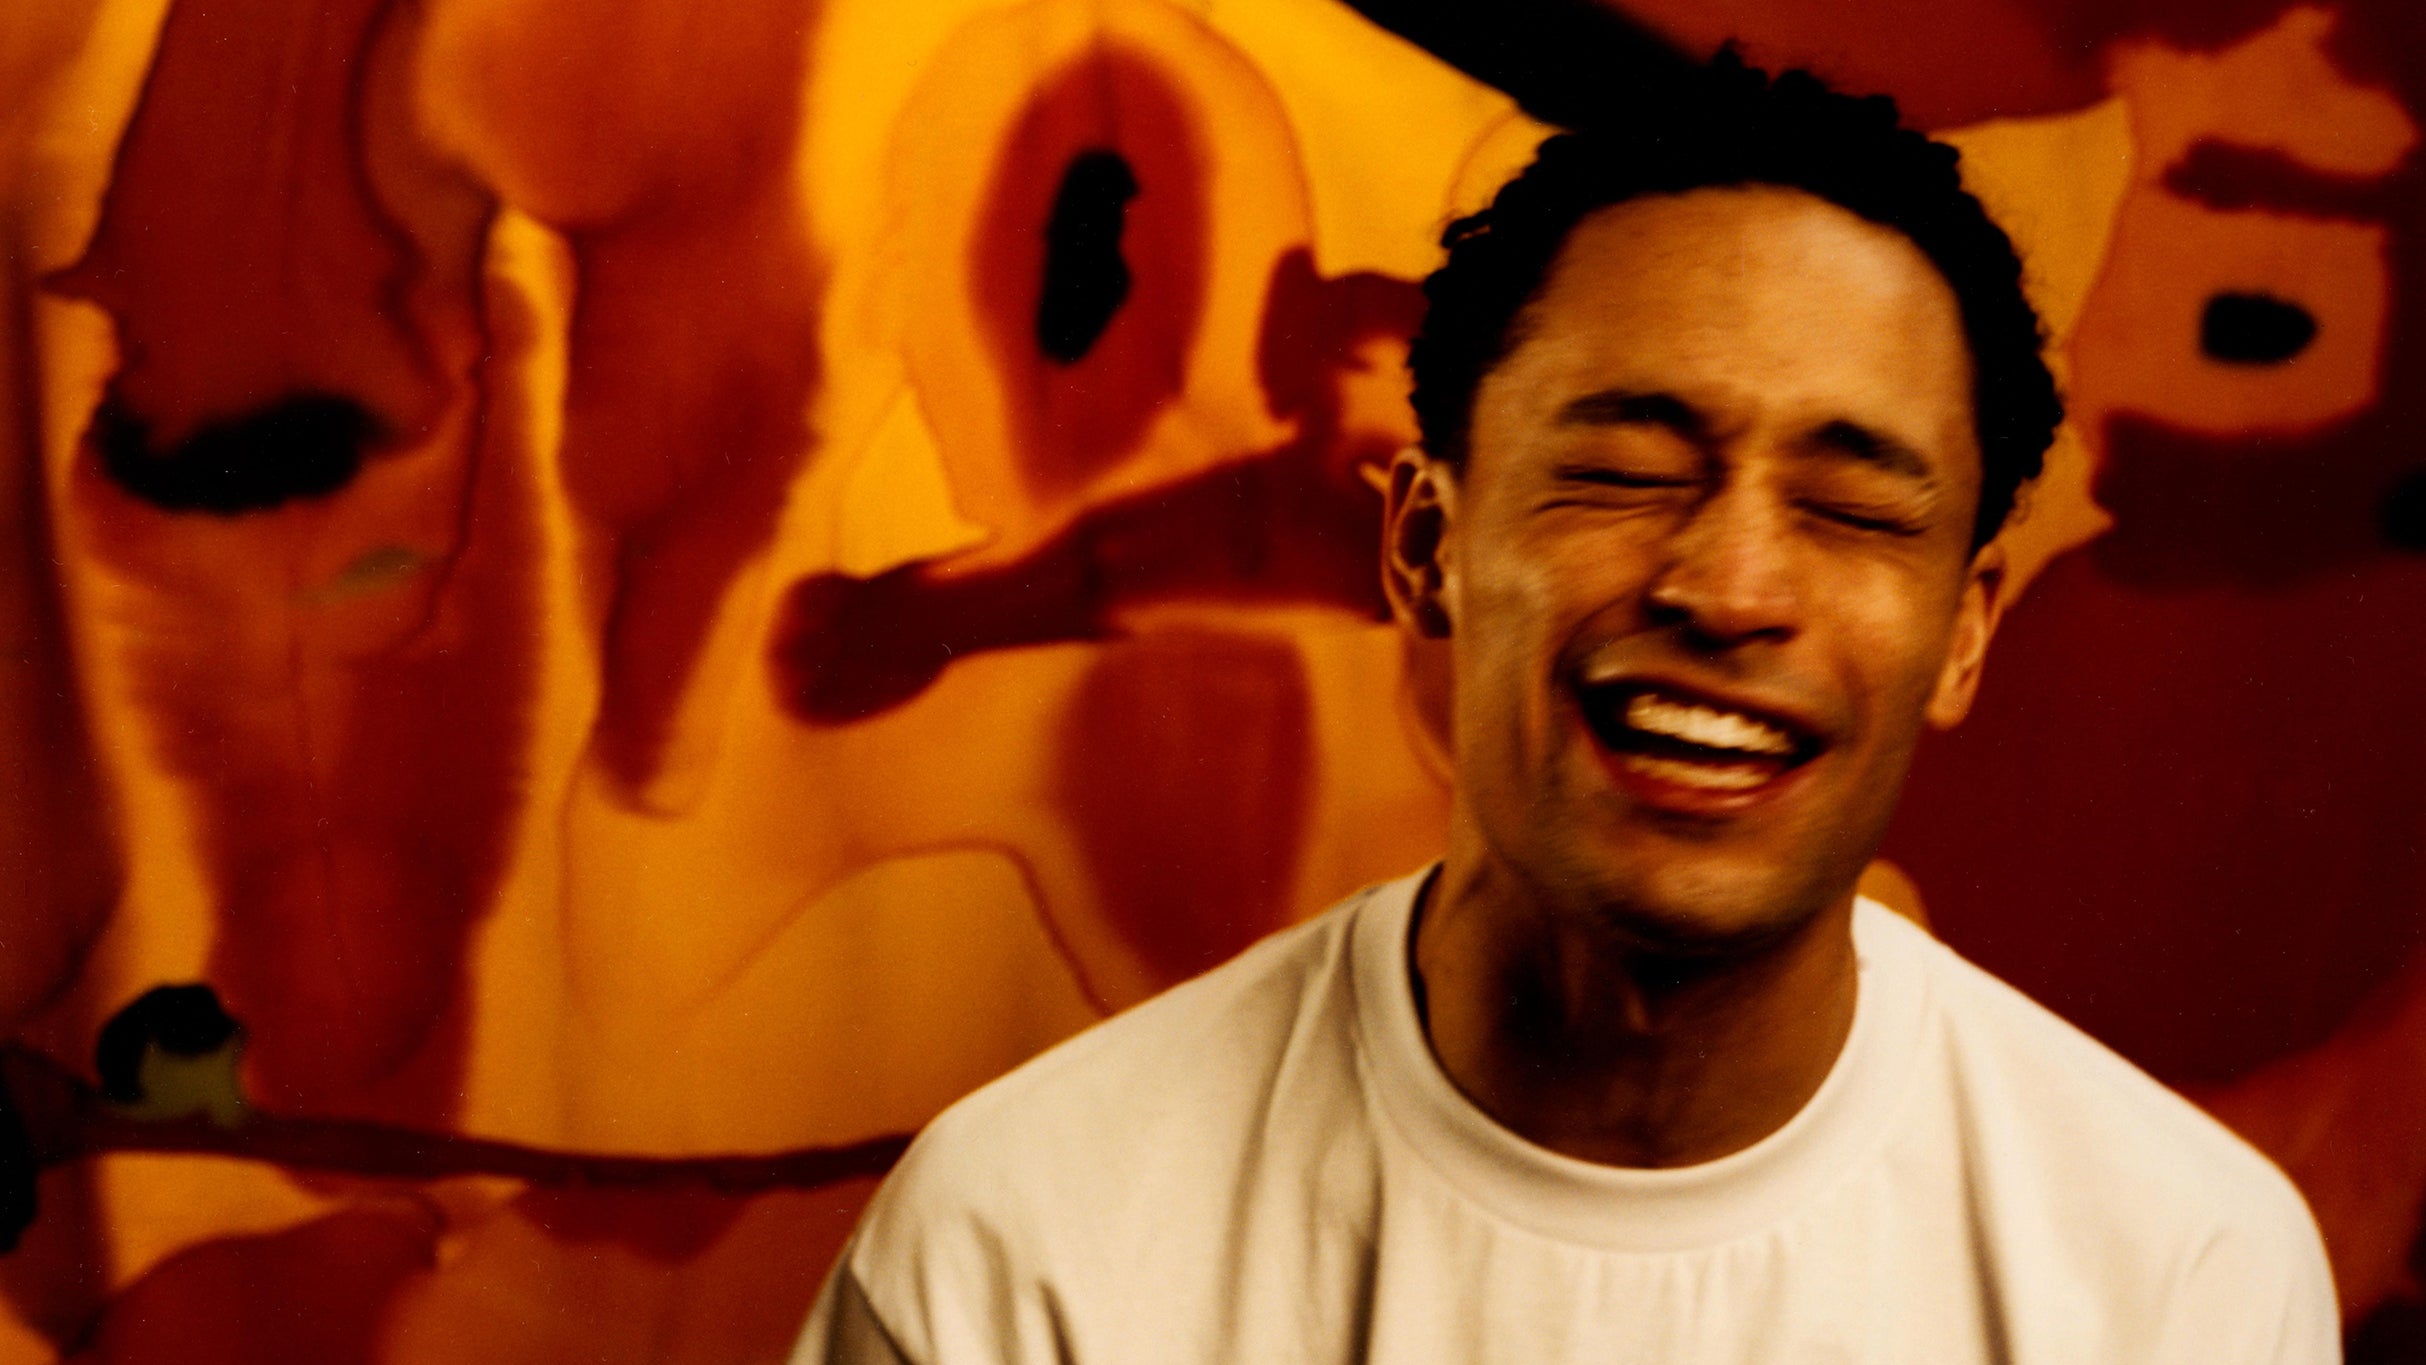 Loyle Carner presale password for early tickets in New York